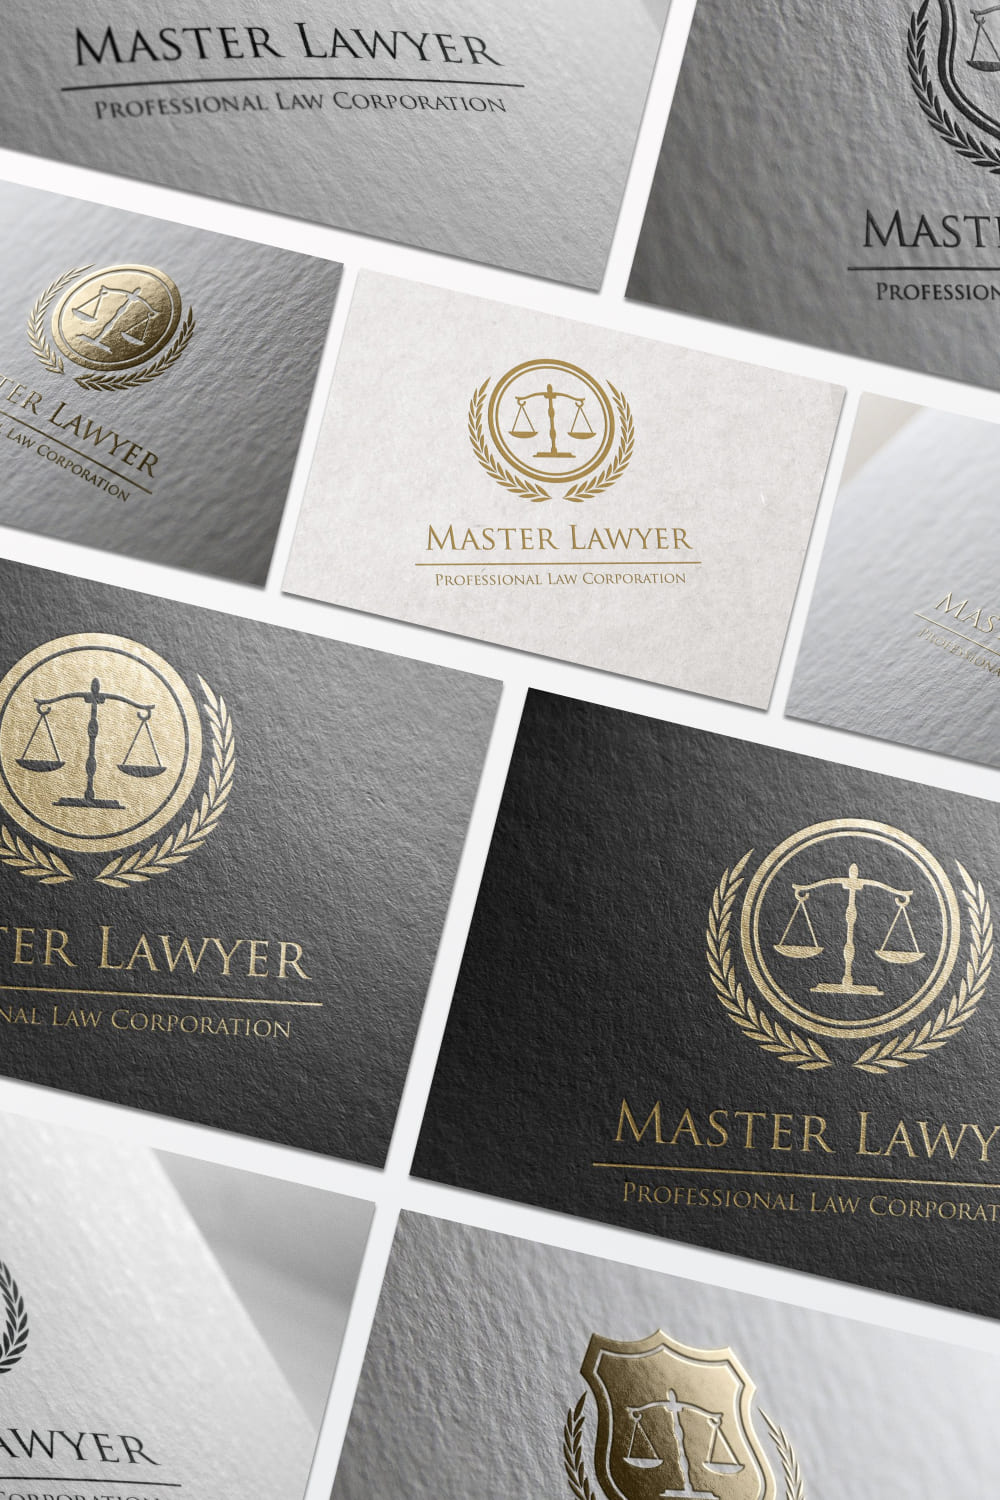 law firm logo graphics.